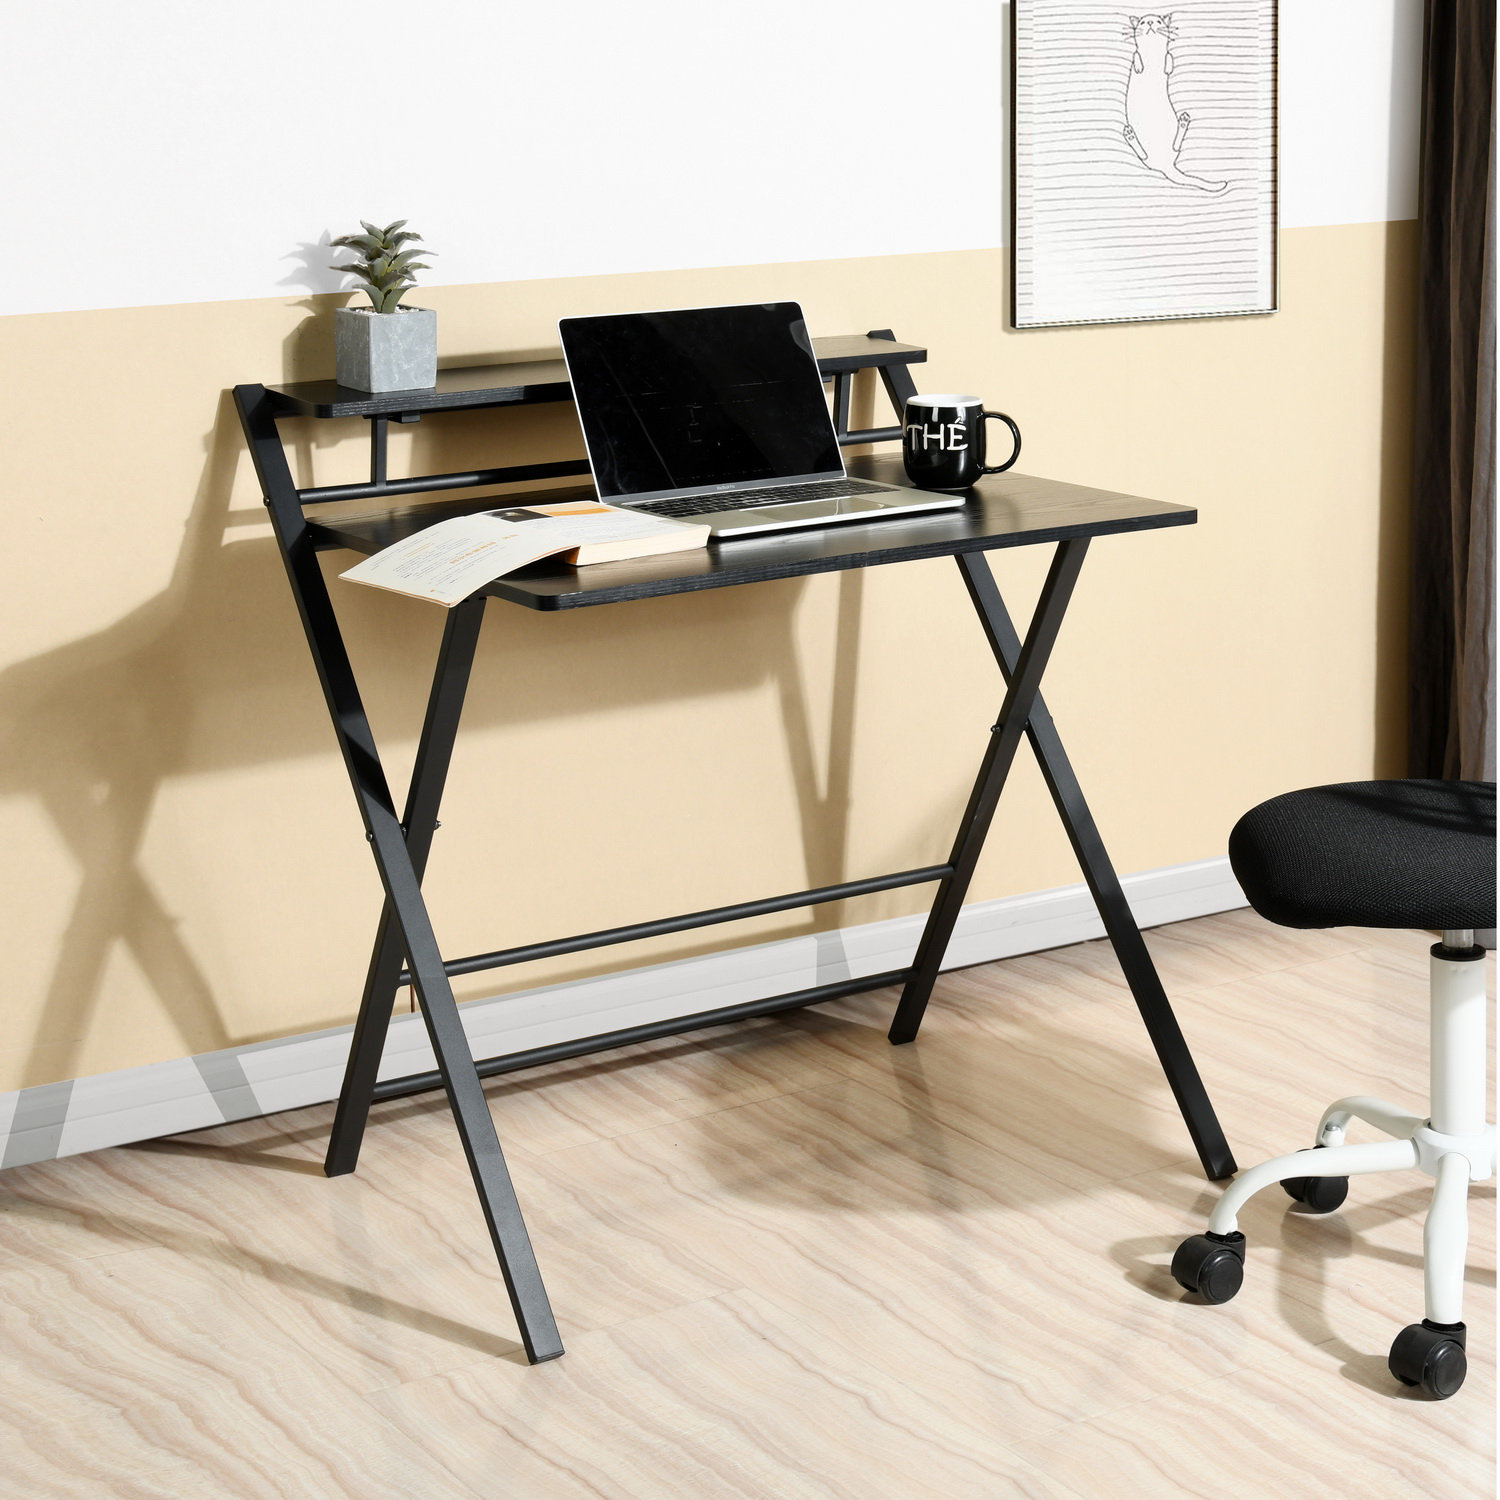 Foldable Chair With Table, Mobile Working Station, Portable Office Desk  Chair, Ergonomic Minimalist Folding Desk for Laptop, Picnic Chair 